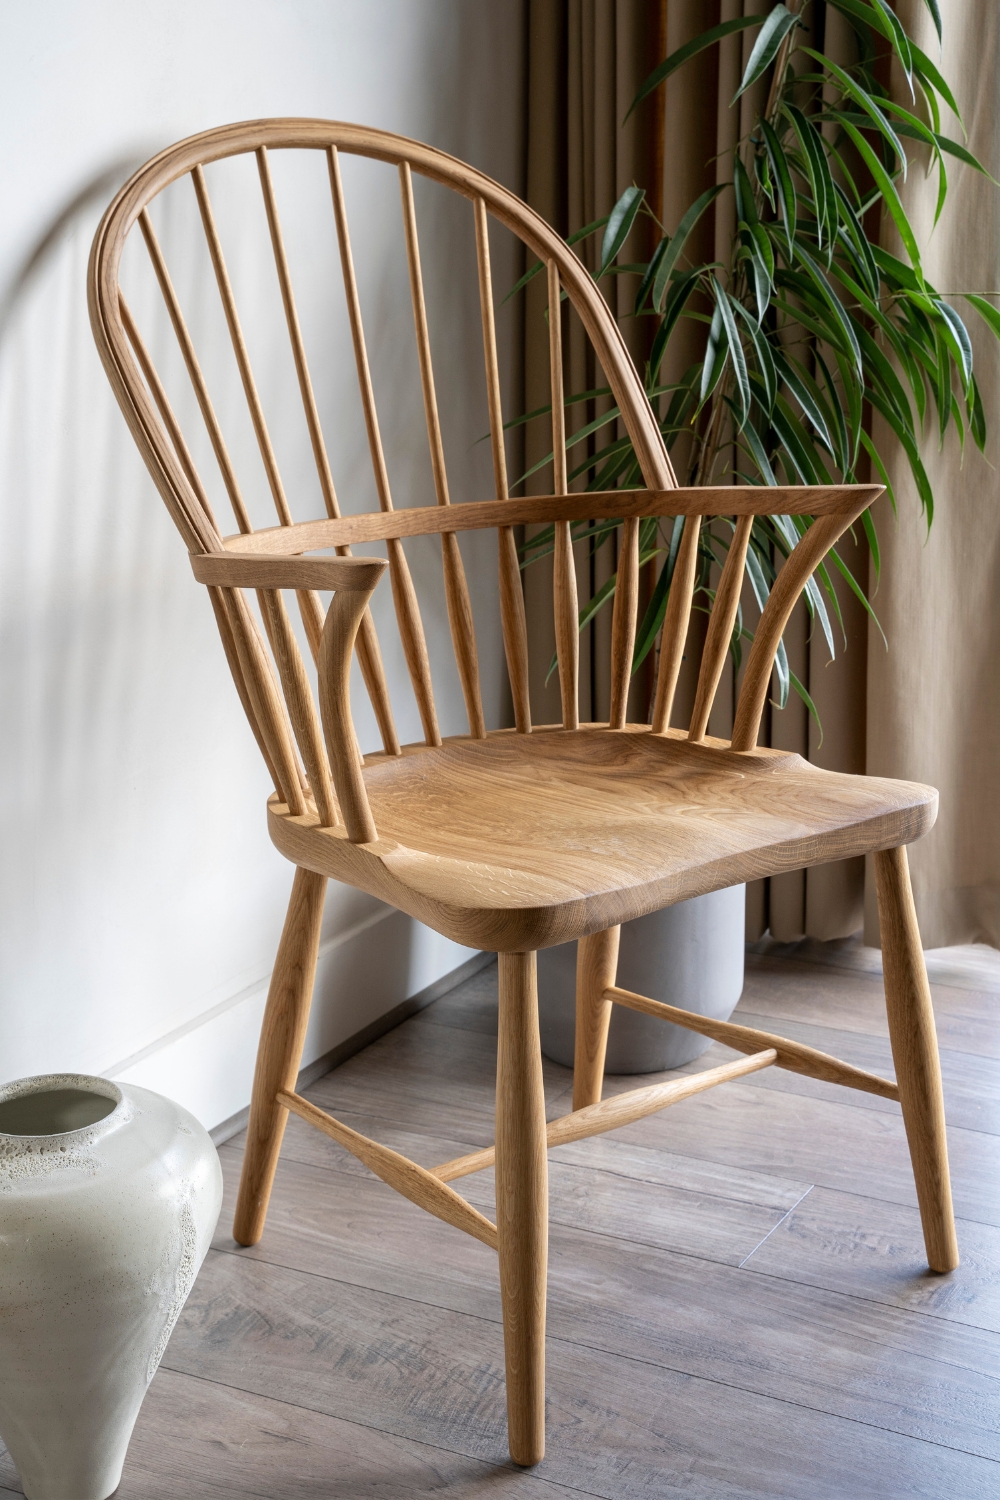 close up of the minimalist Danish designed Windsor chair- a high back chair made with wood ideal for dining and lounge chair